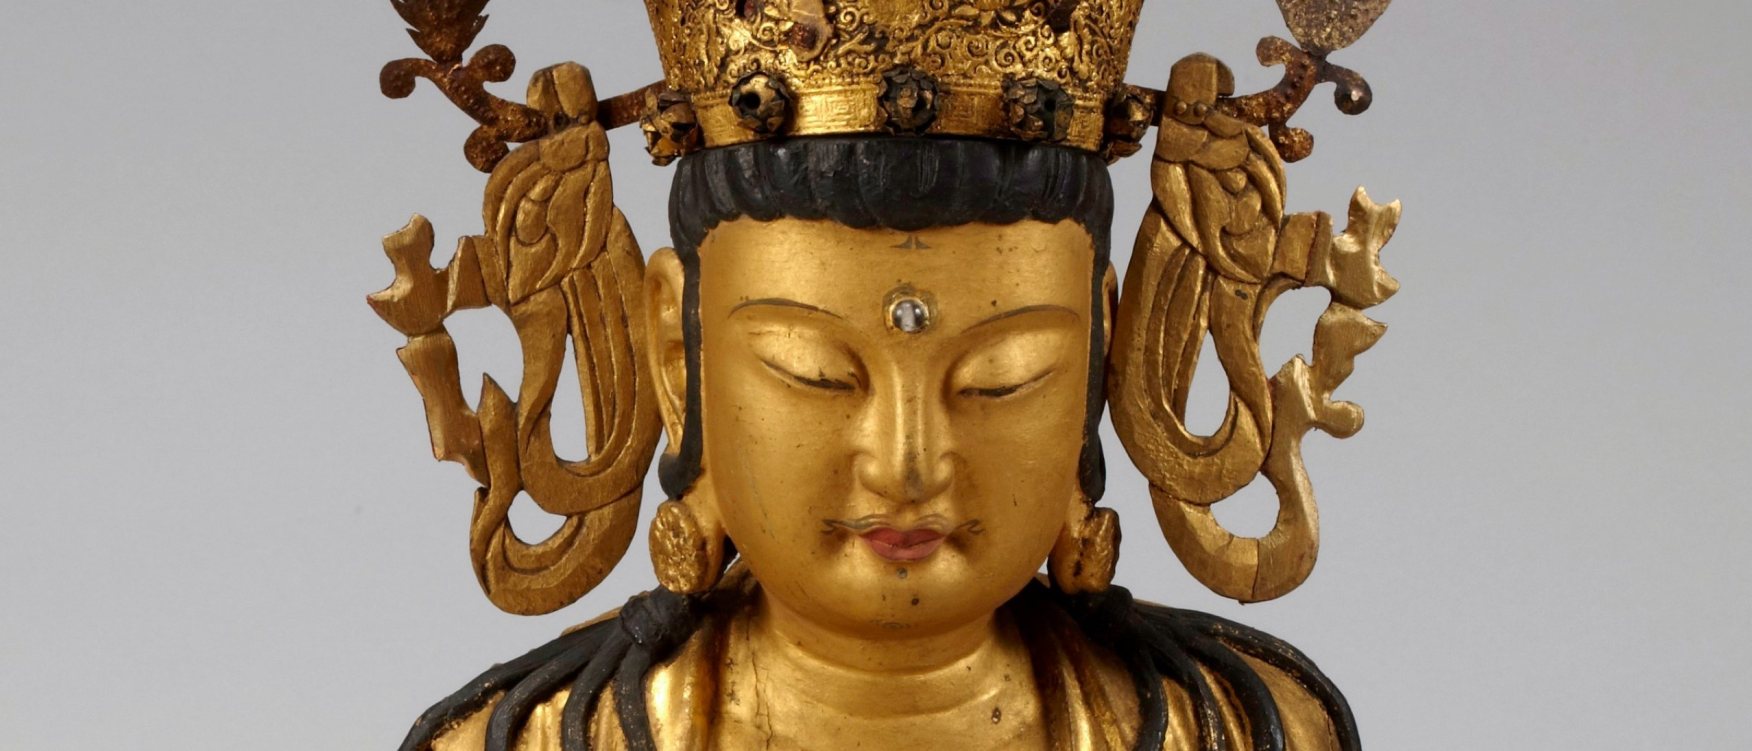 Smithsonian Is Comes It the Buddhist | There Freer|Sackler More When Institution Sculpture to Reveals Smithsonian\'s Eye Meets Than